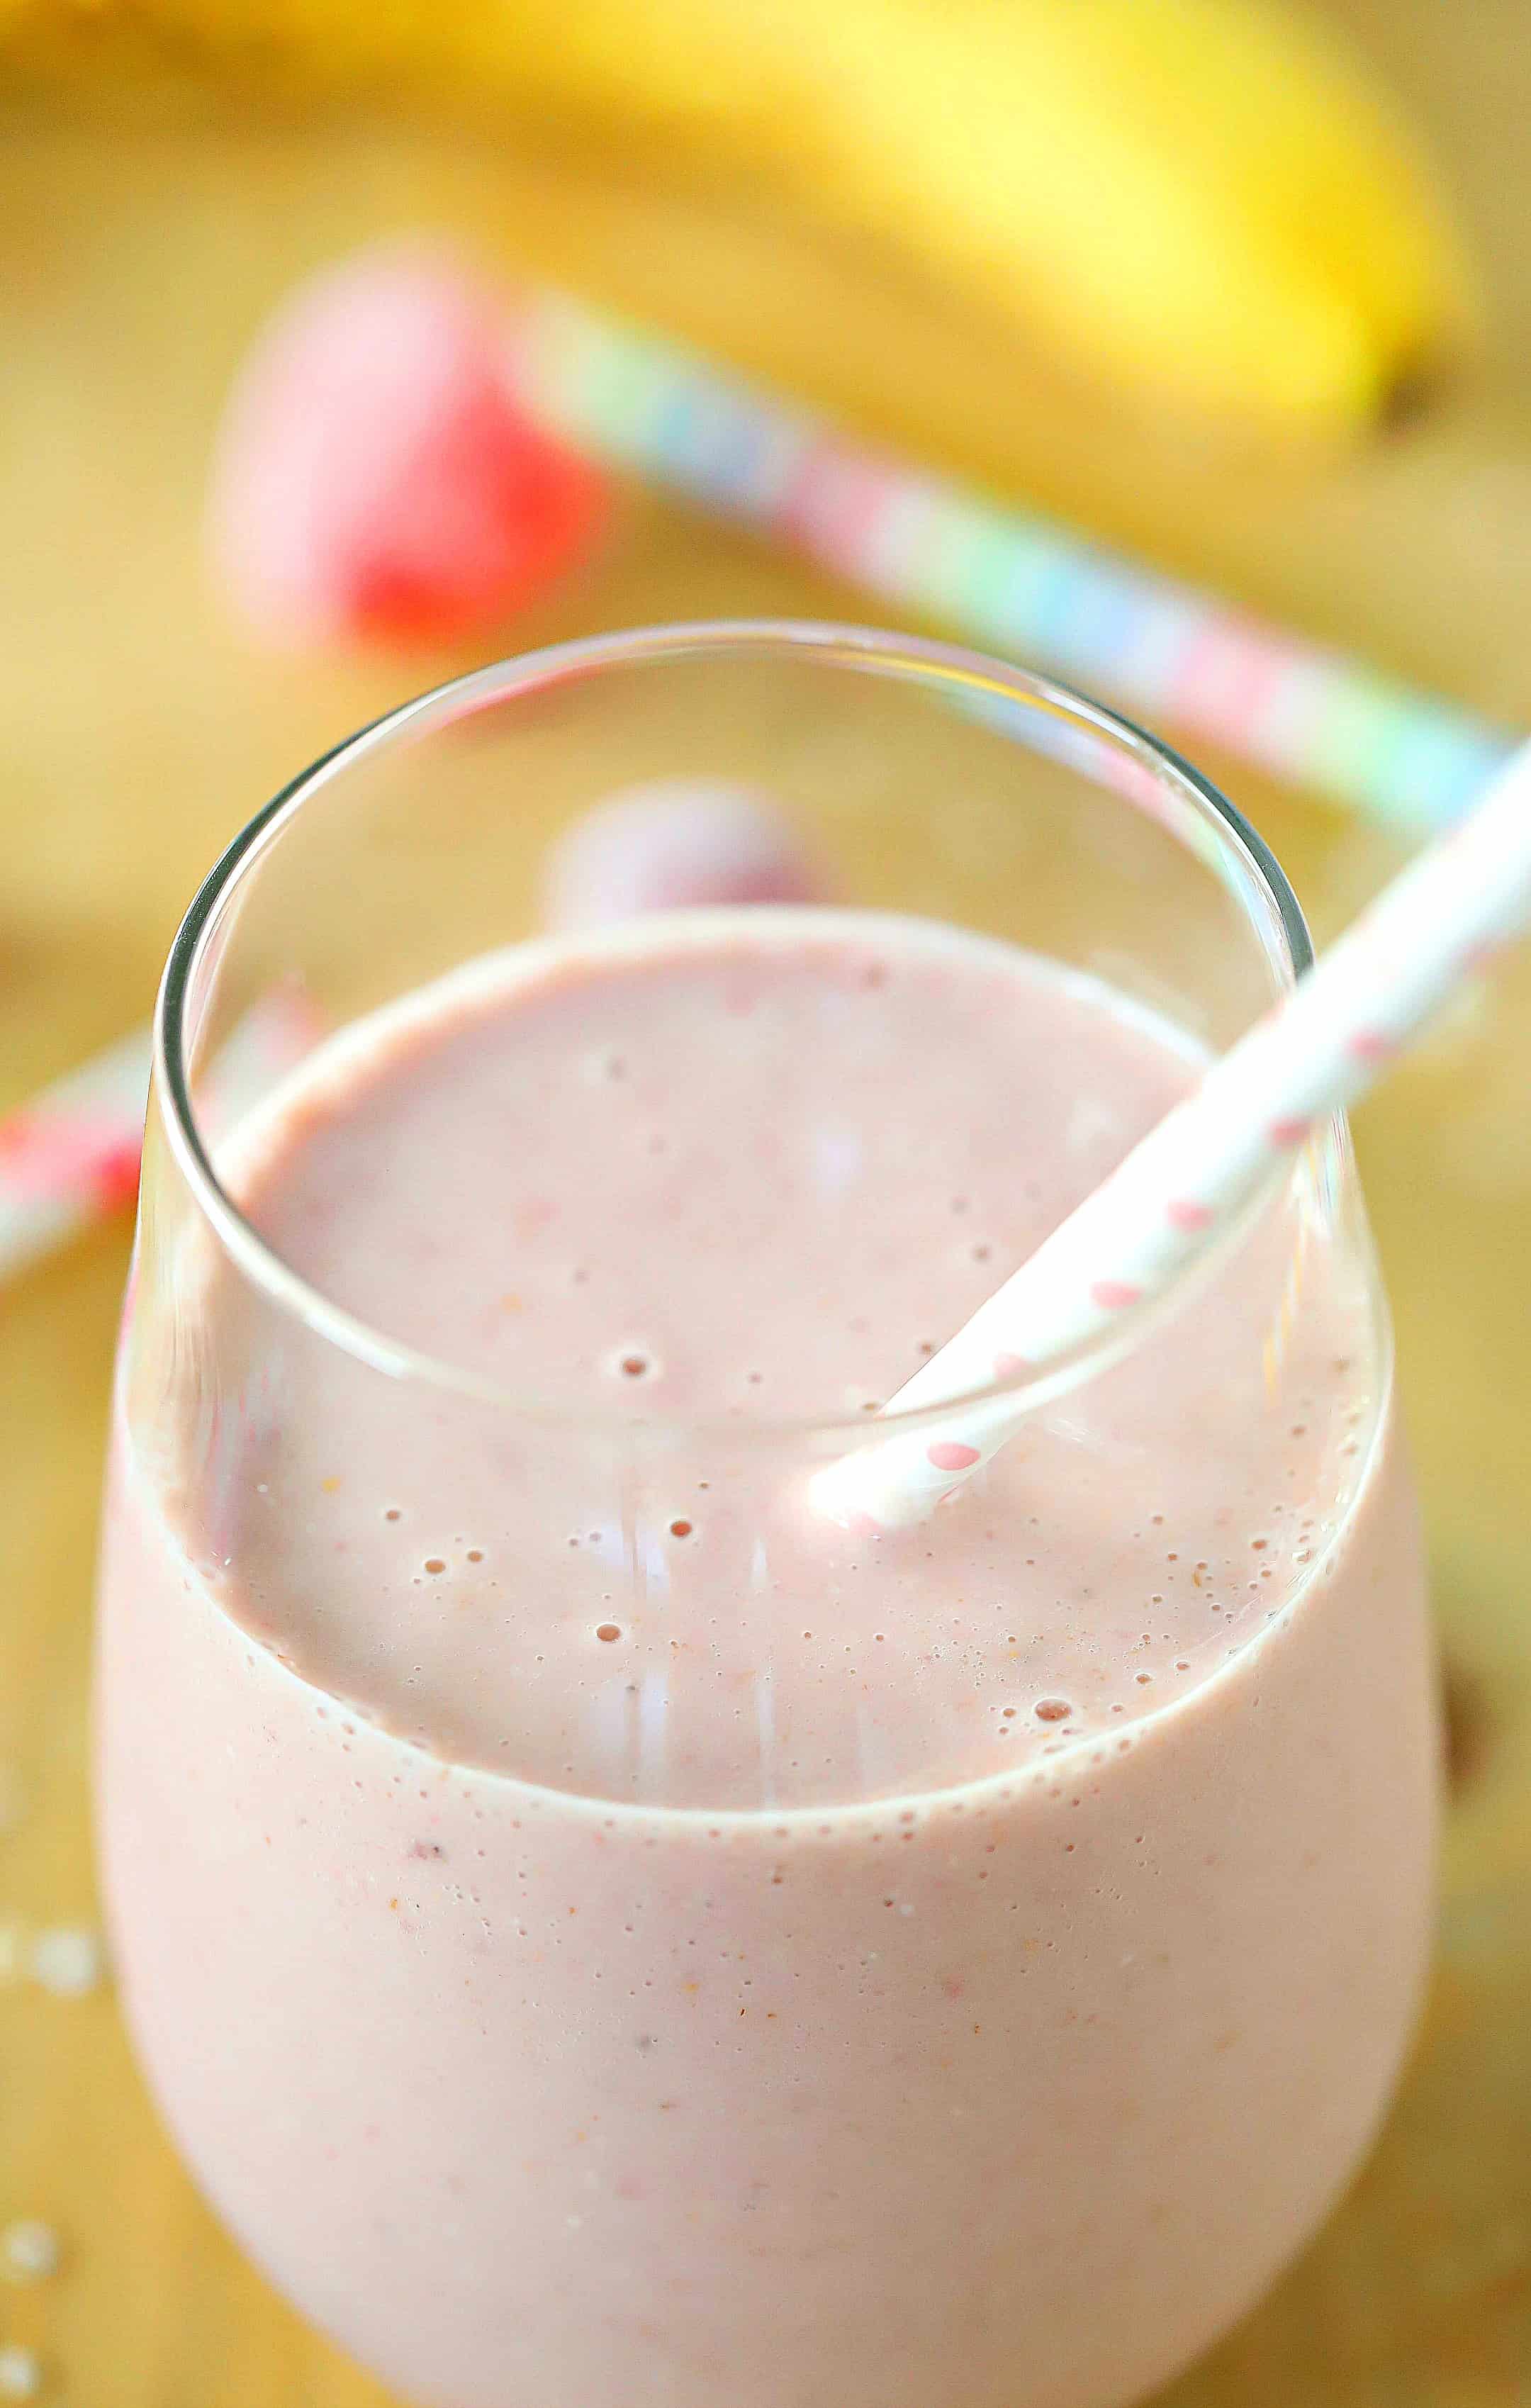 Photo of a strawberry oatmeal smoothie with a straw inside the glass cup.